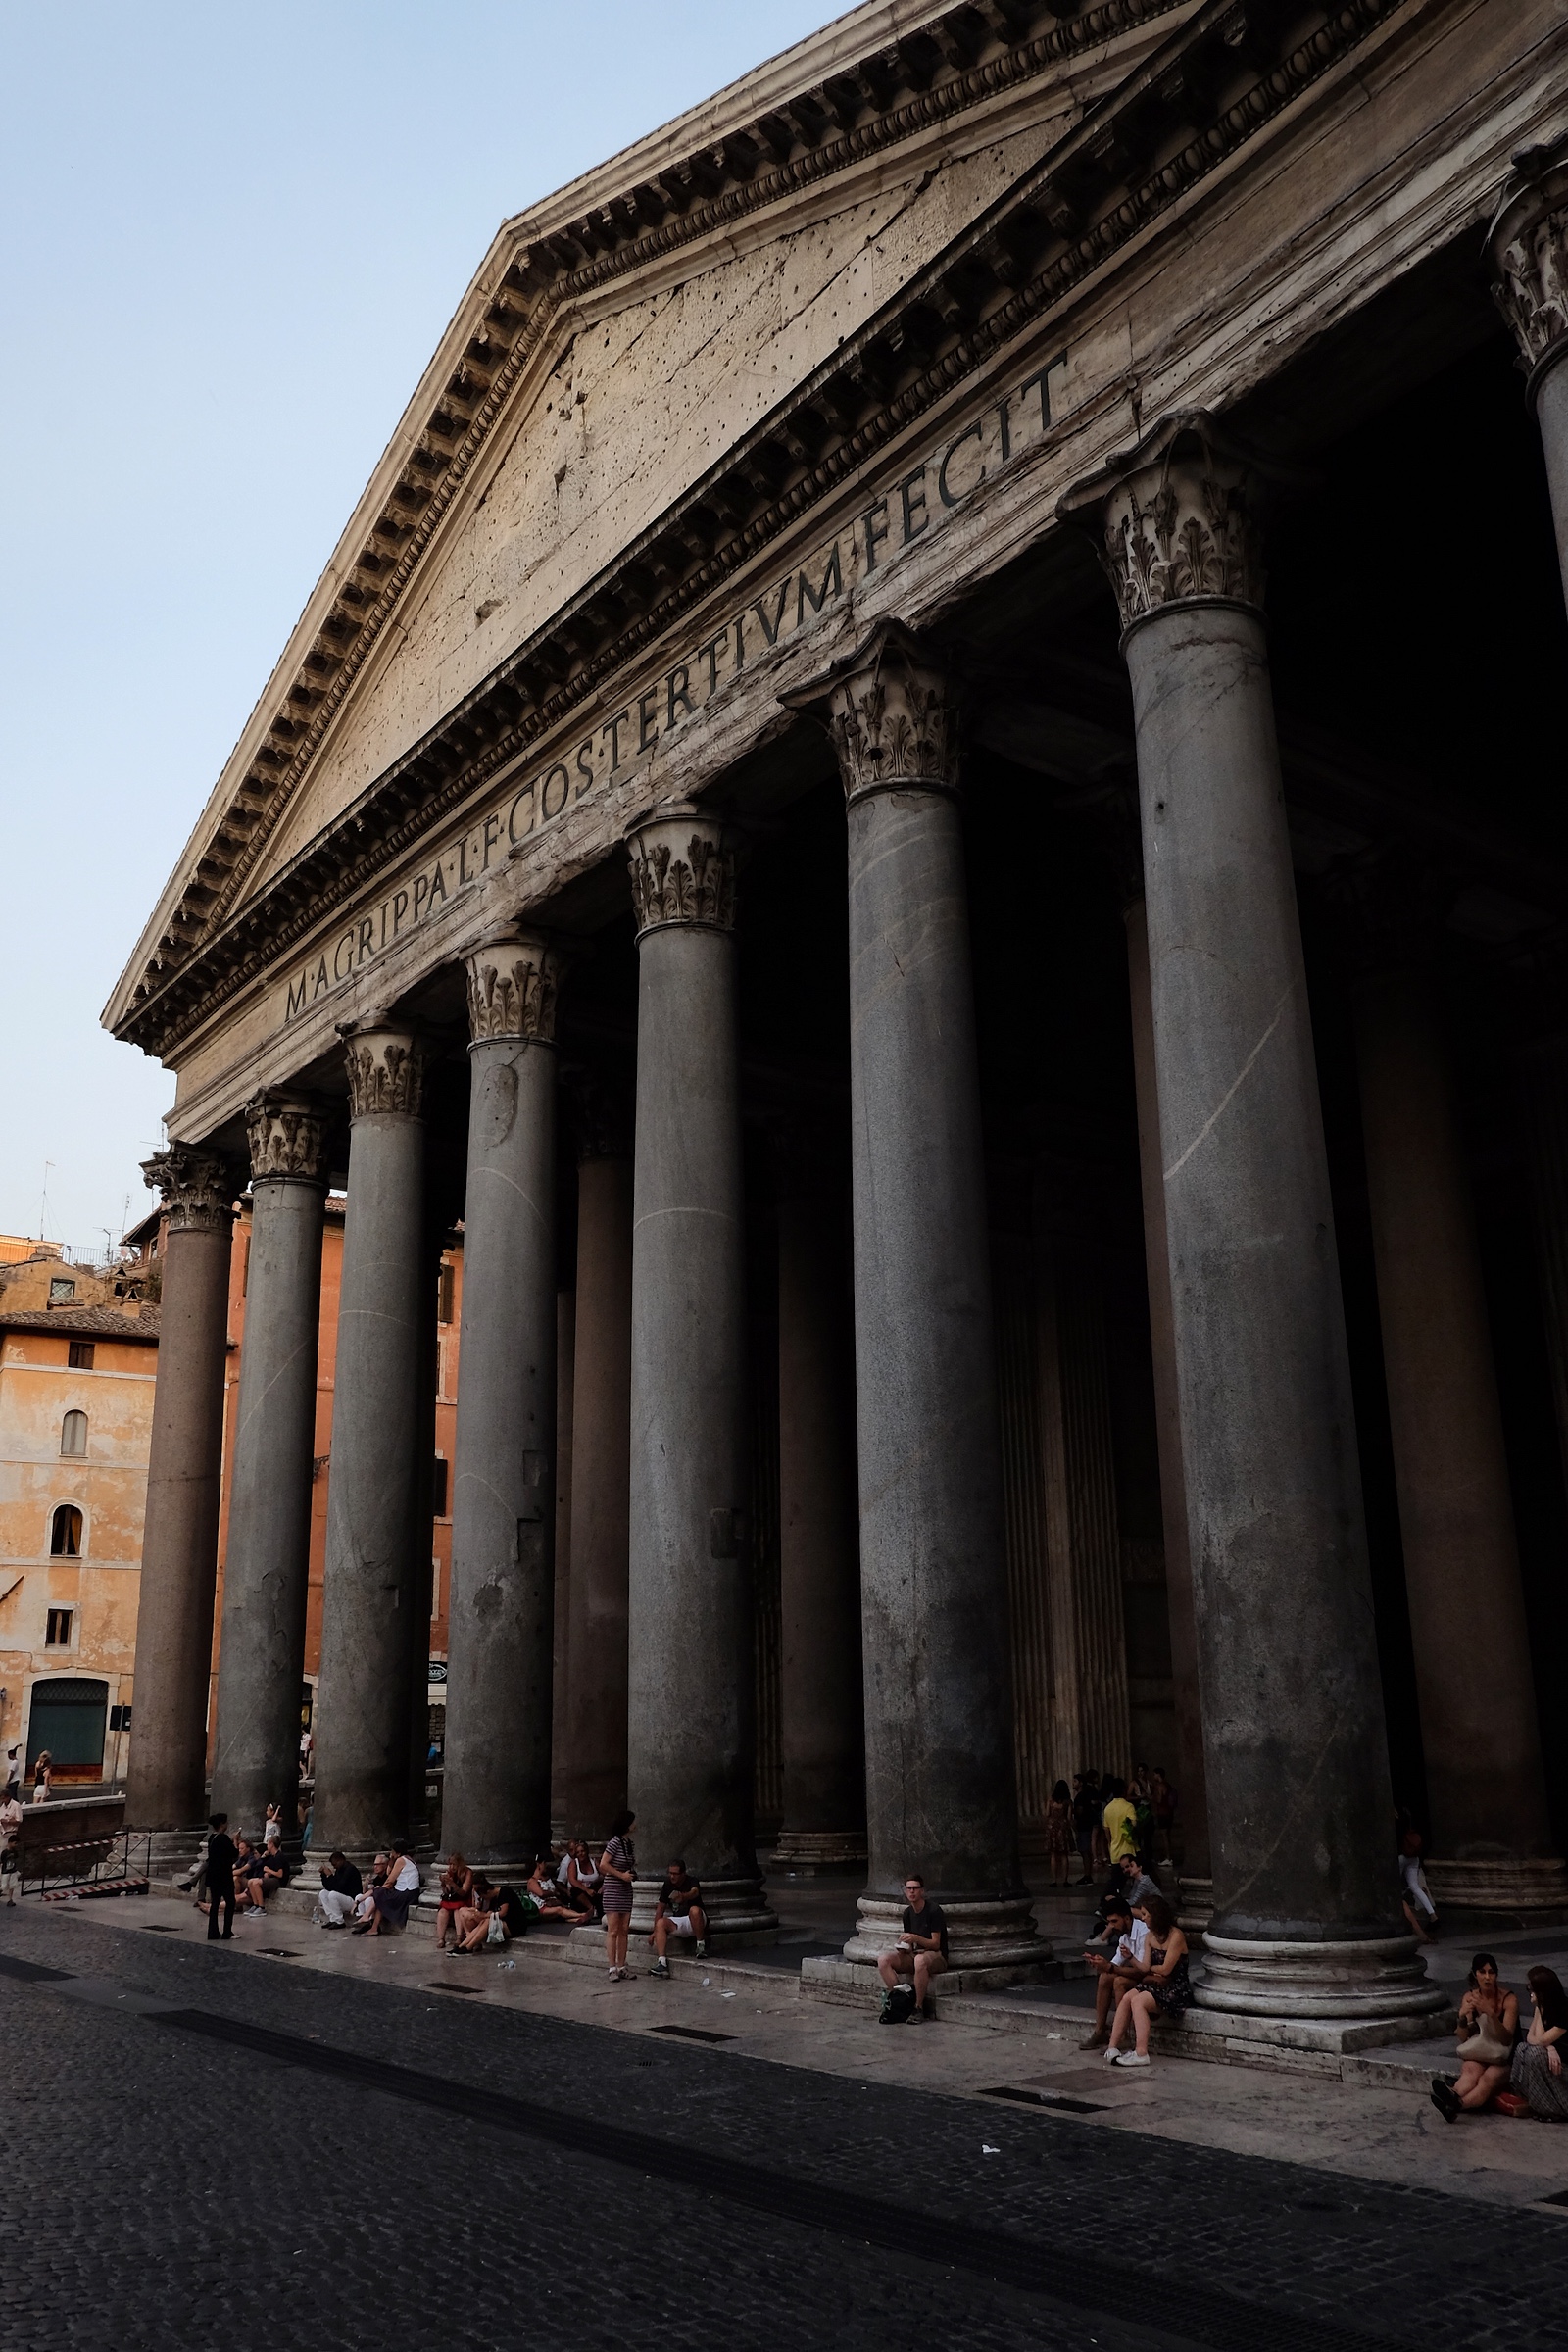 Walking past the Pantheon hunting for more gelato.